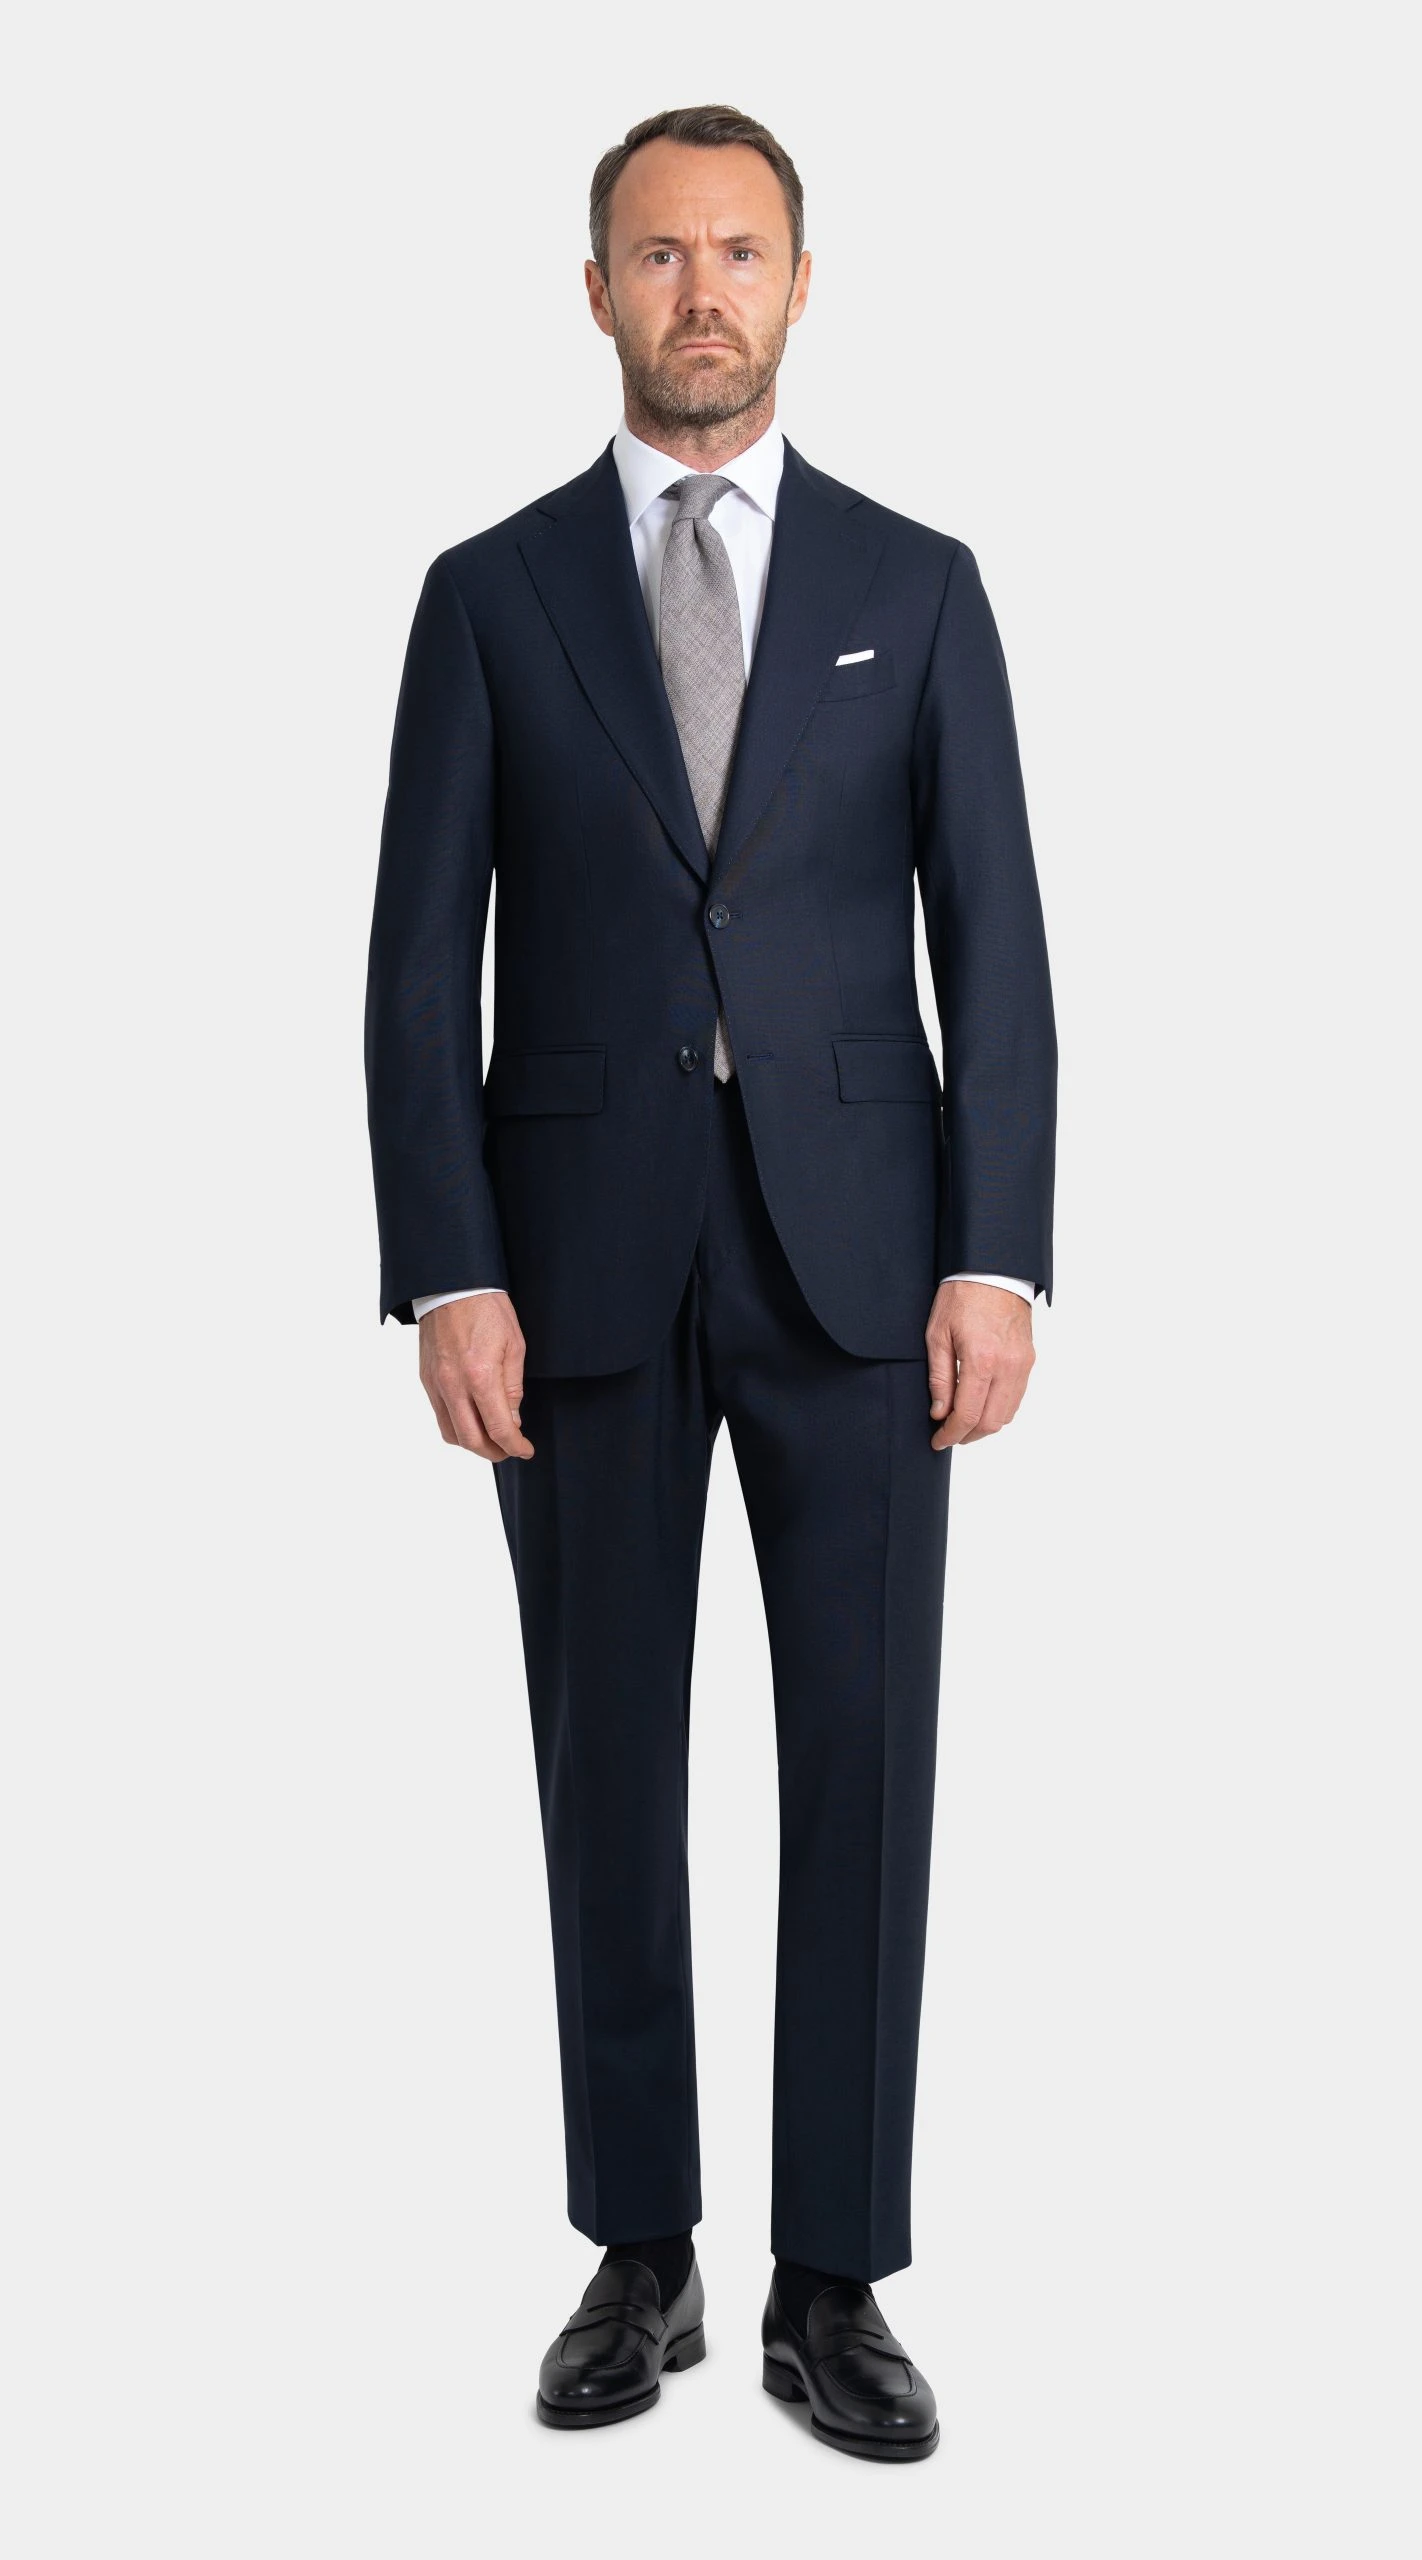 Navy blue suit in twistair fabric and grey tie by Mond